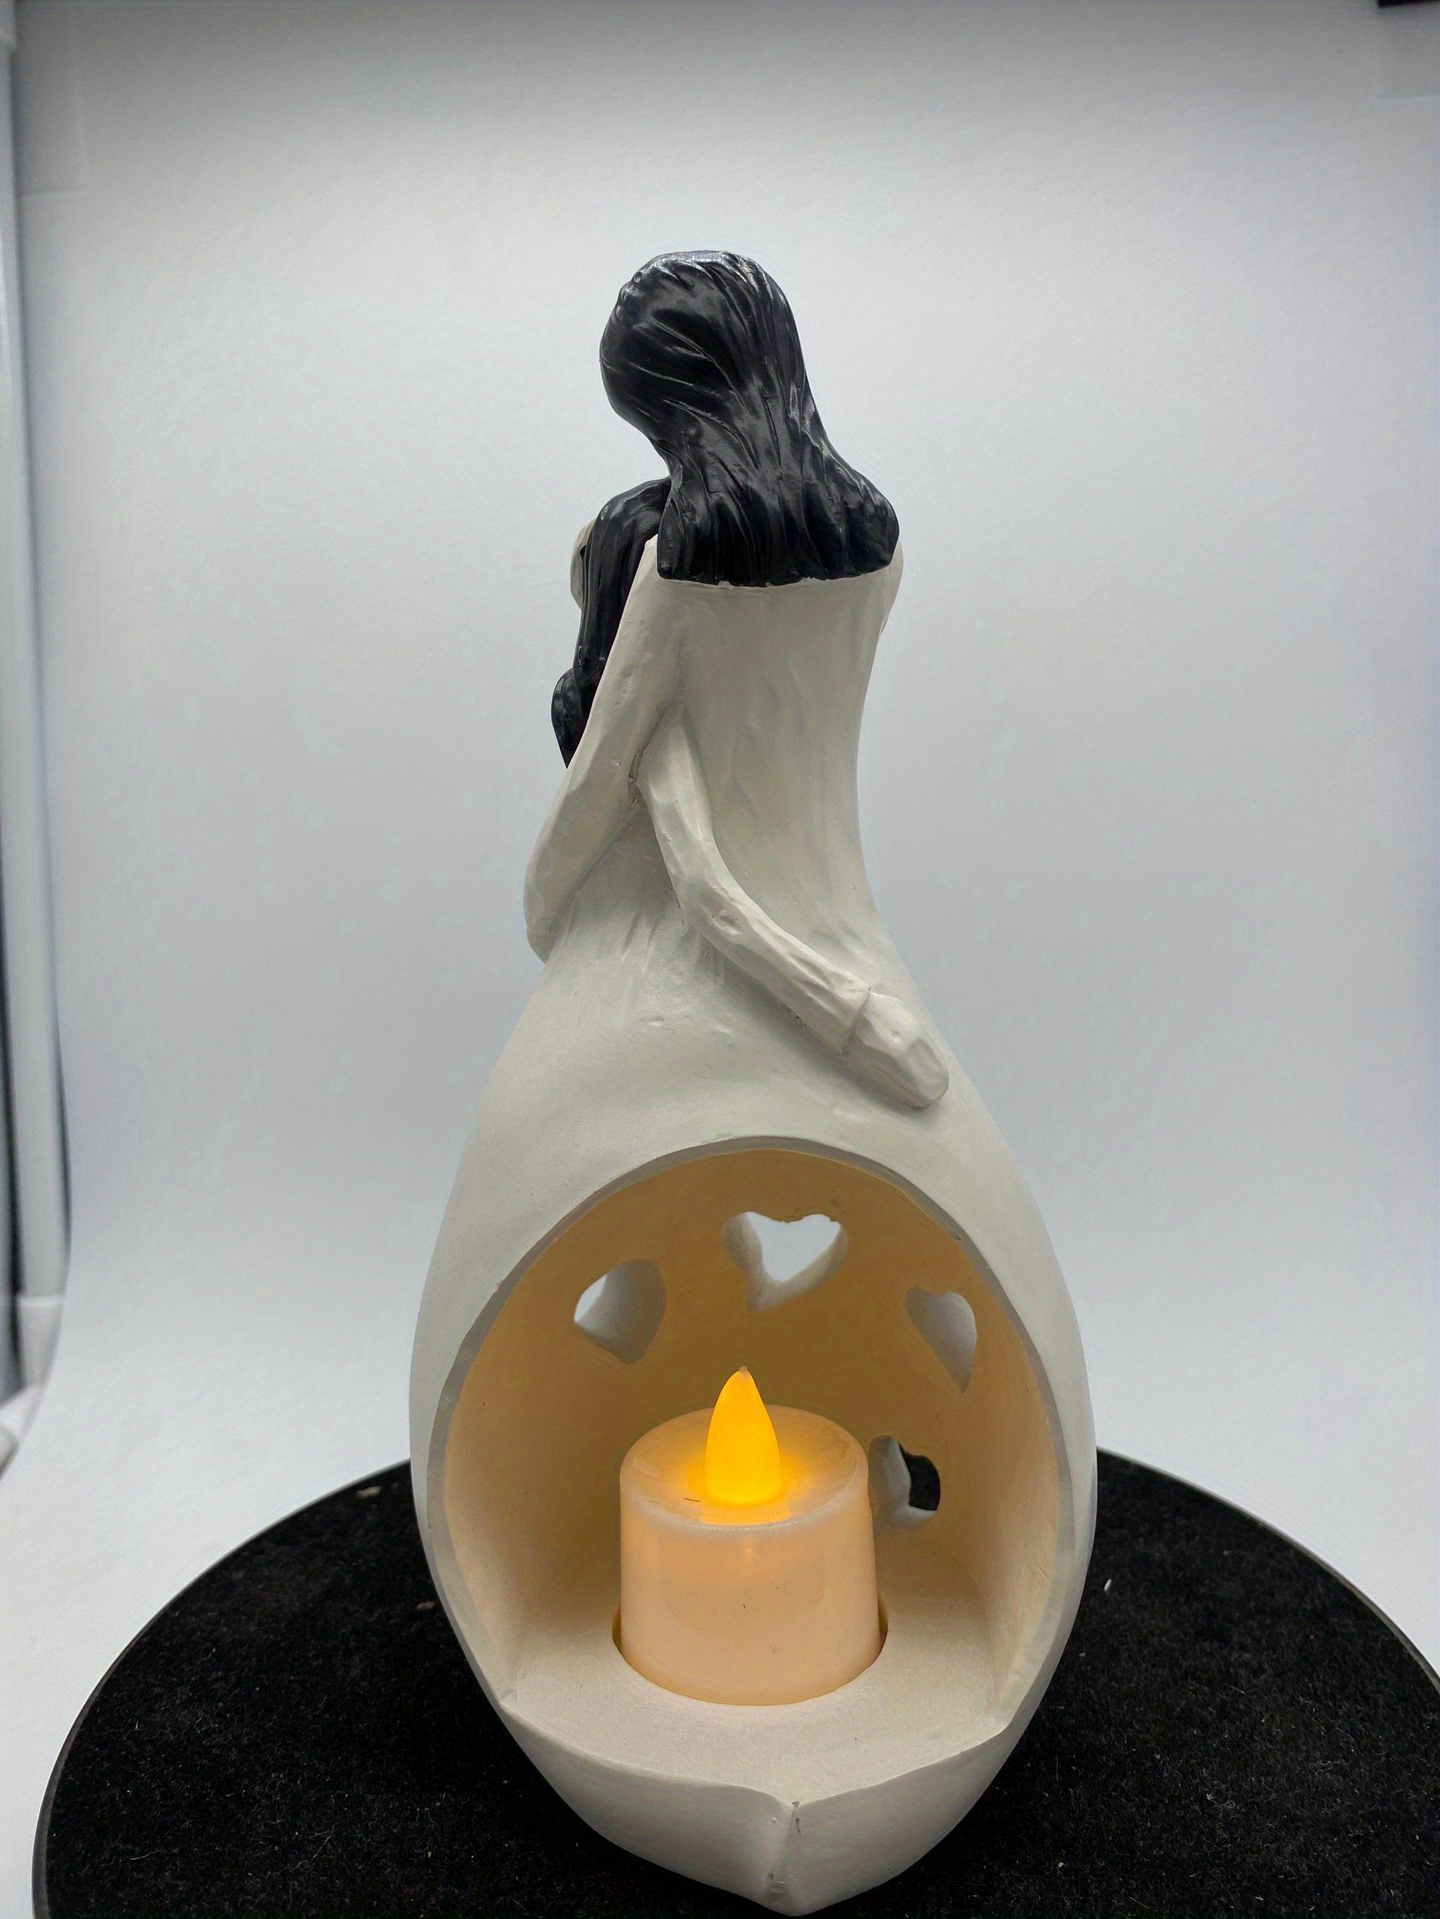 Mom & Daughter Gifts - Candle Holder Statue W/ Flickering LED